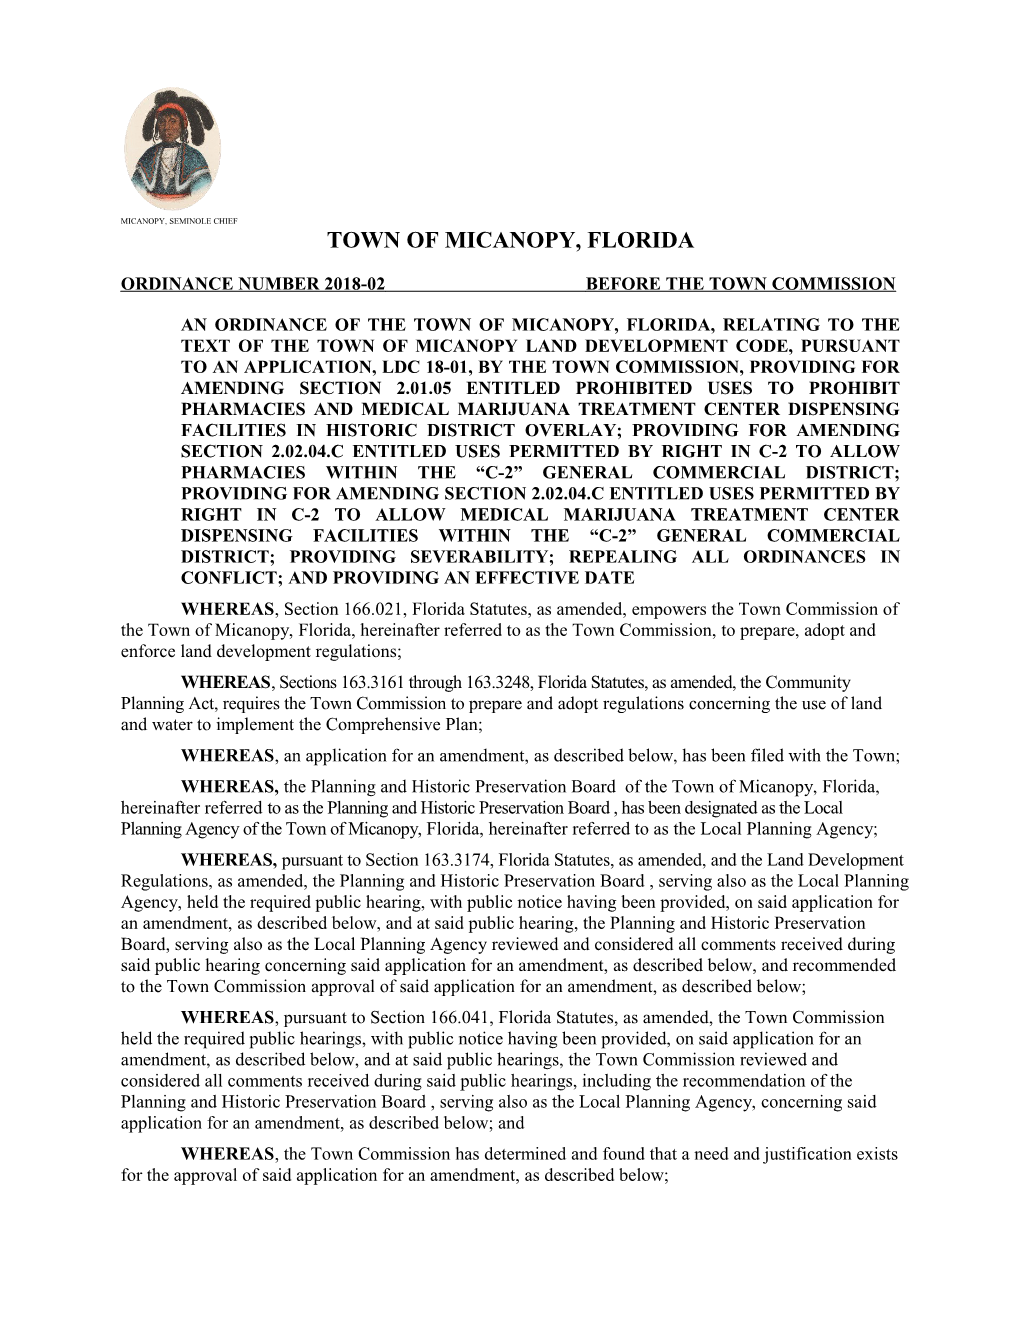 Ordinance Number 2018-02Before the Town Commission